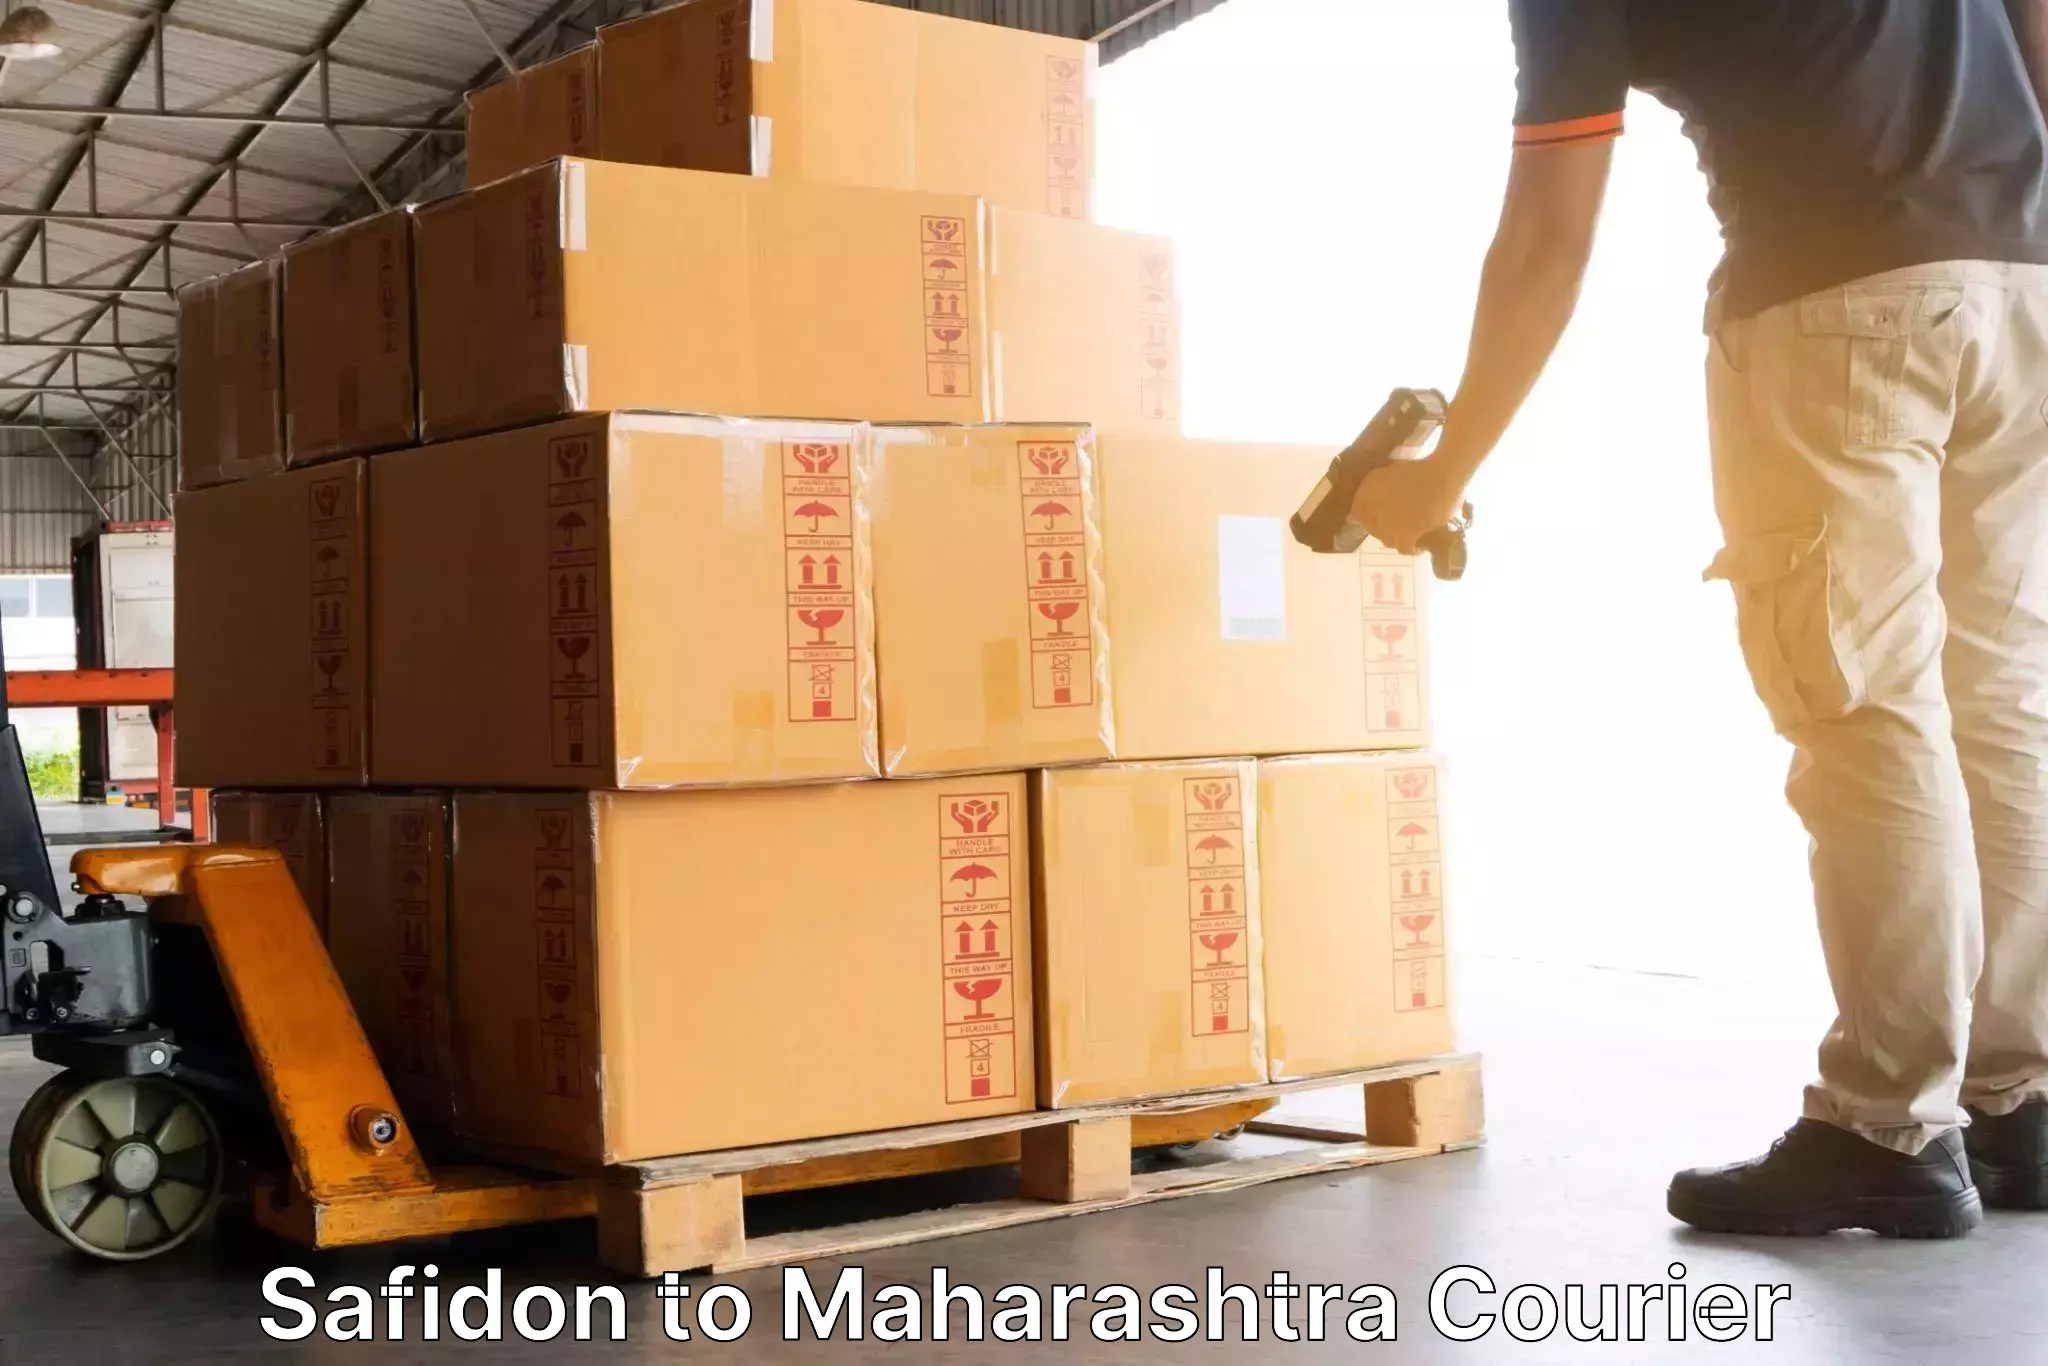 Customizable delivery plans in Safidon to Maharashtra